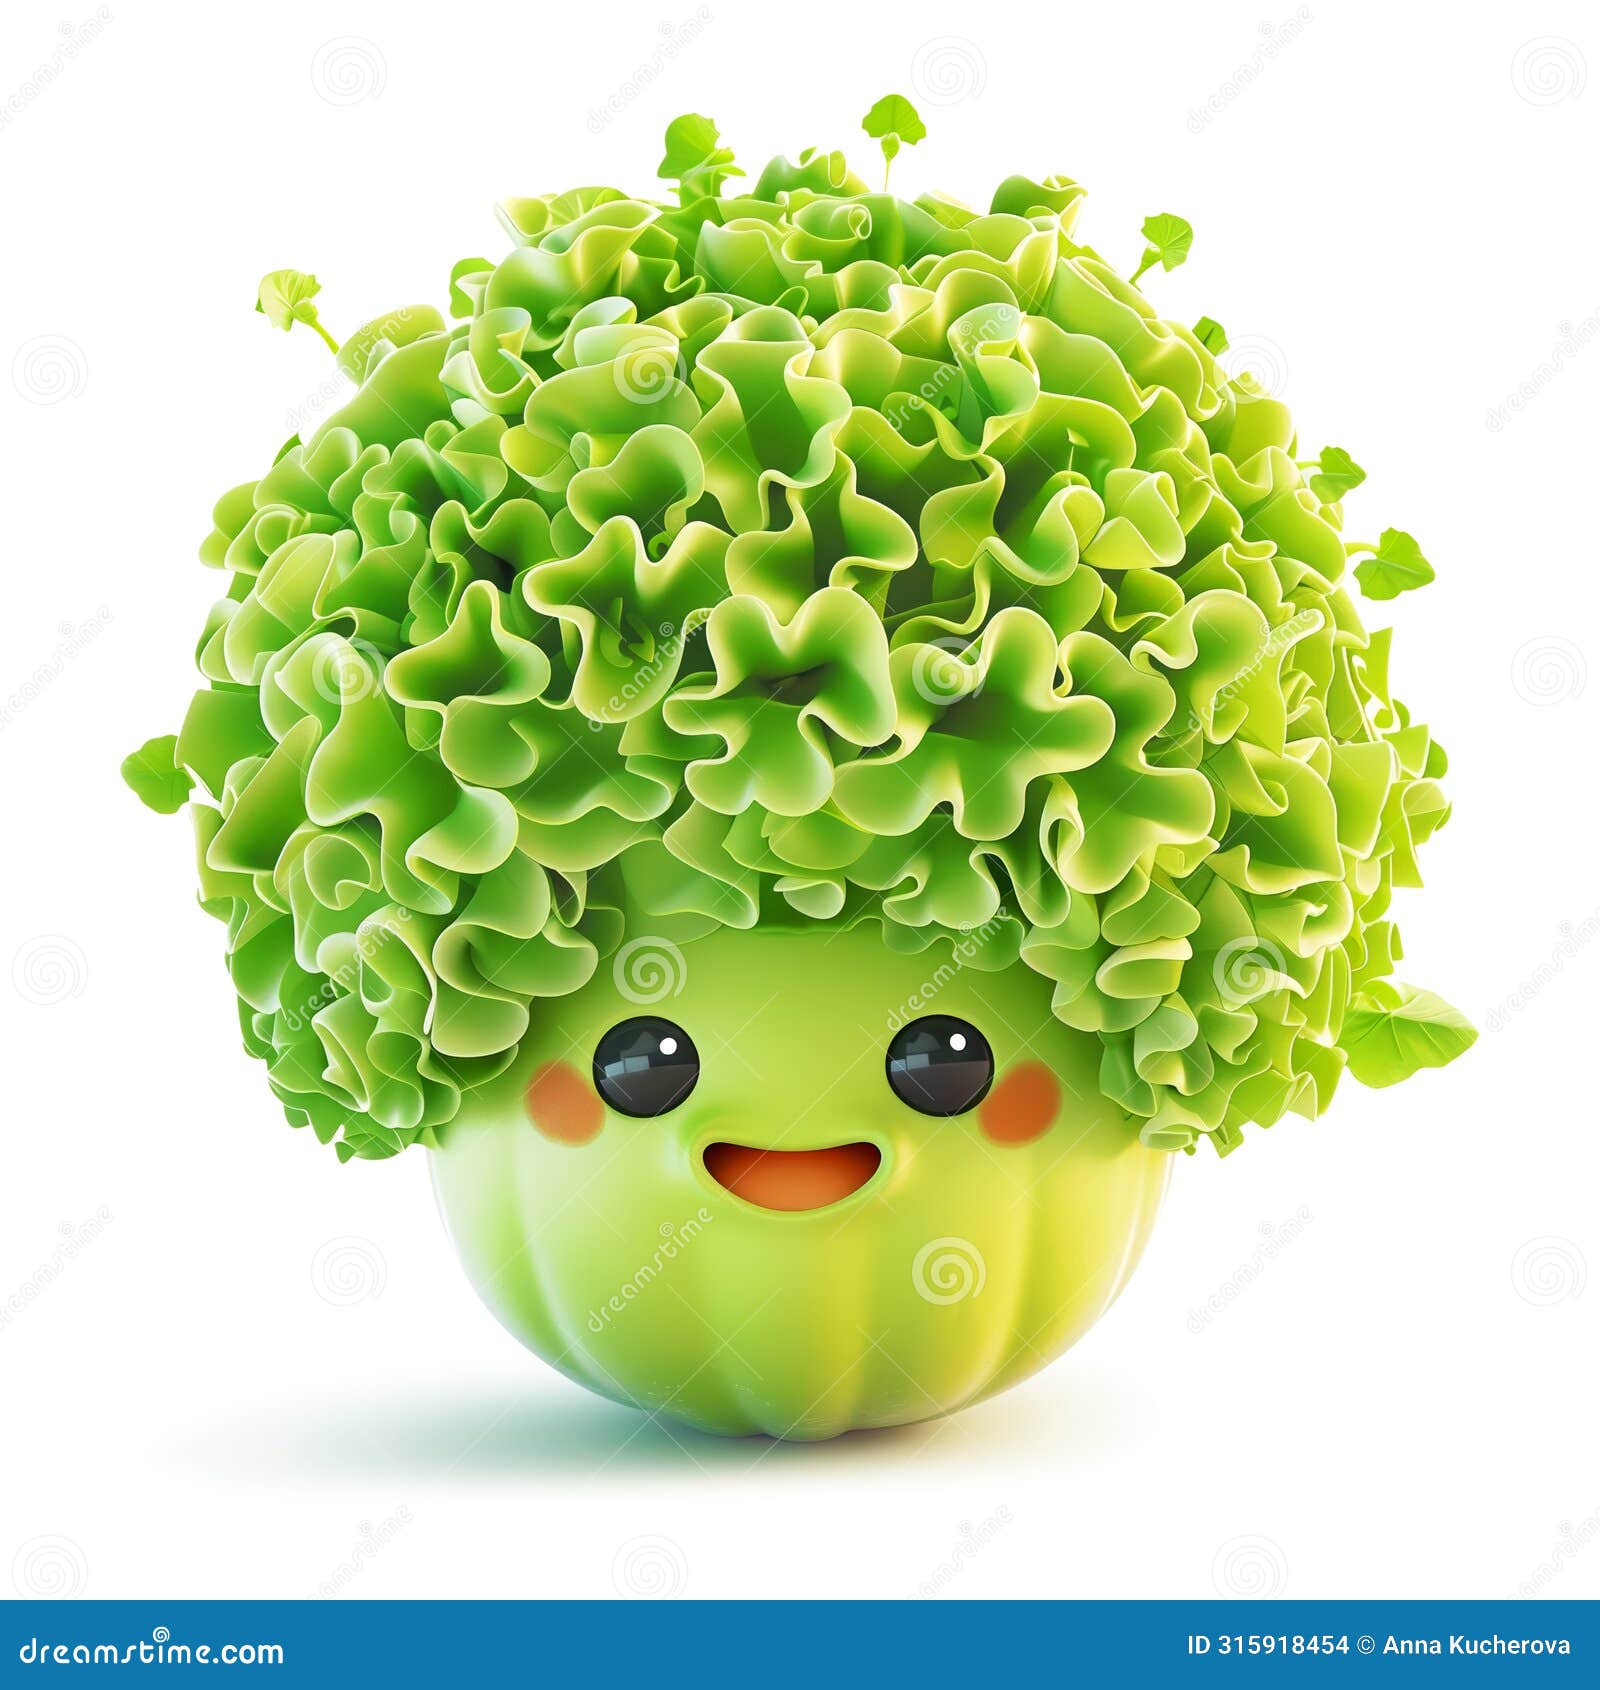 joyful lettuce character with lush green leaves and a happy face